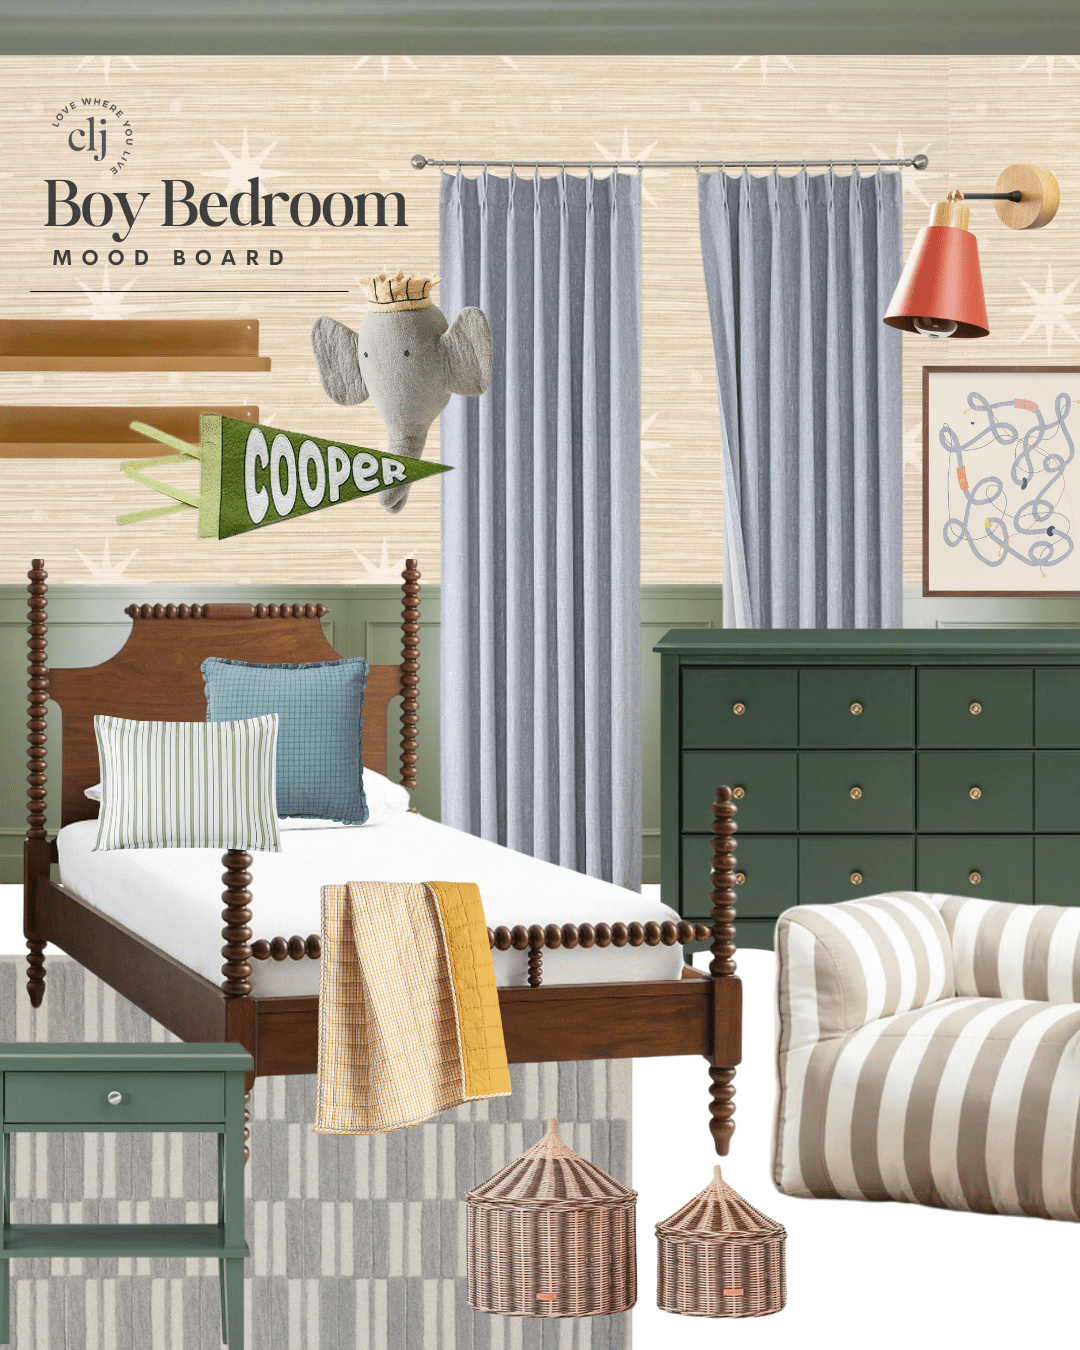 Mood Board: Boy Bedroom featuring forest green dresser, turned wood dark bed, blue drapes, tan wallpaper and complementary accents